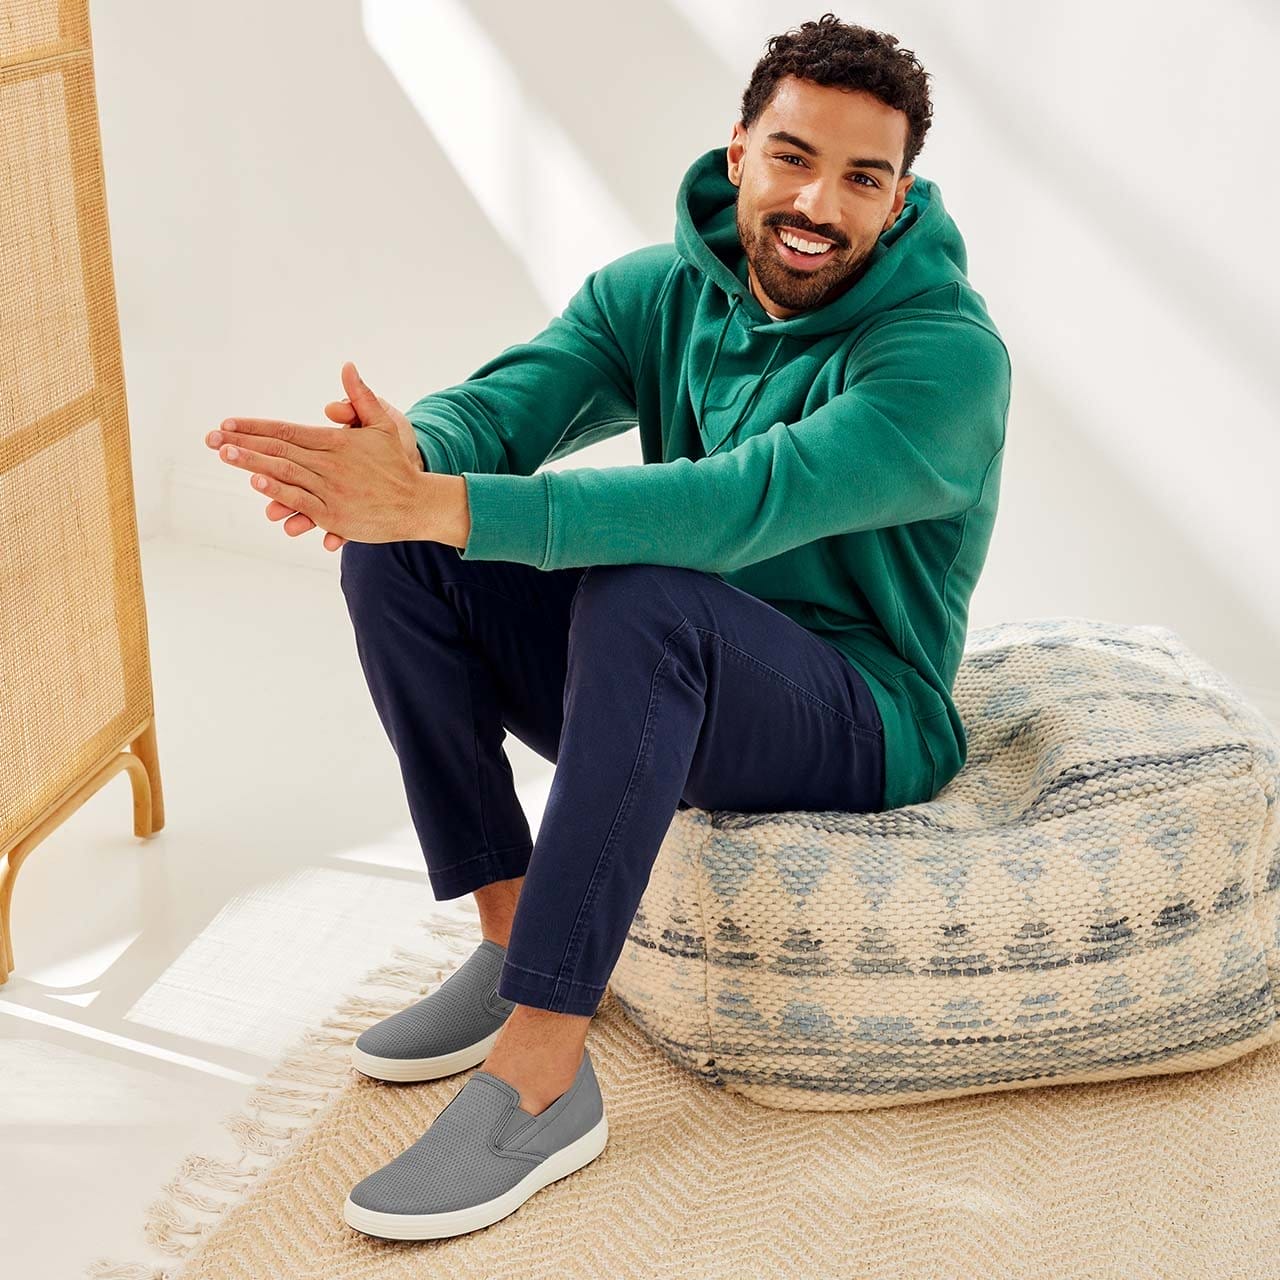 Man sitting on pouf wearing casual clothes and slip on sneakers